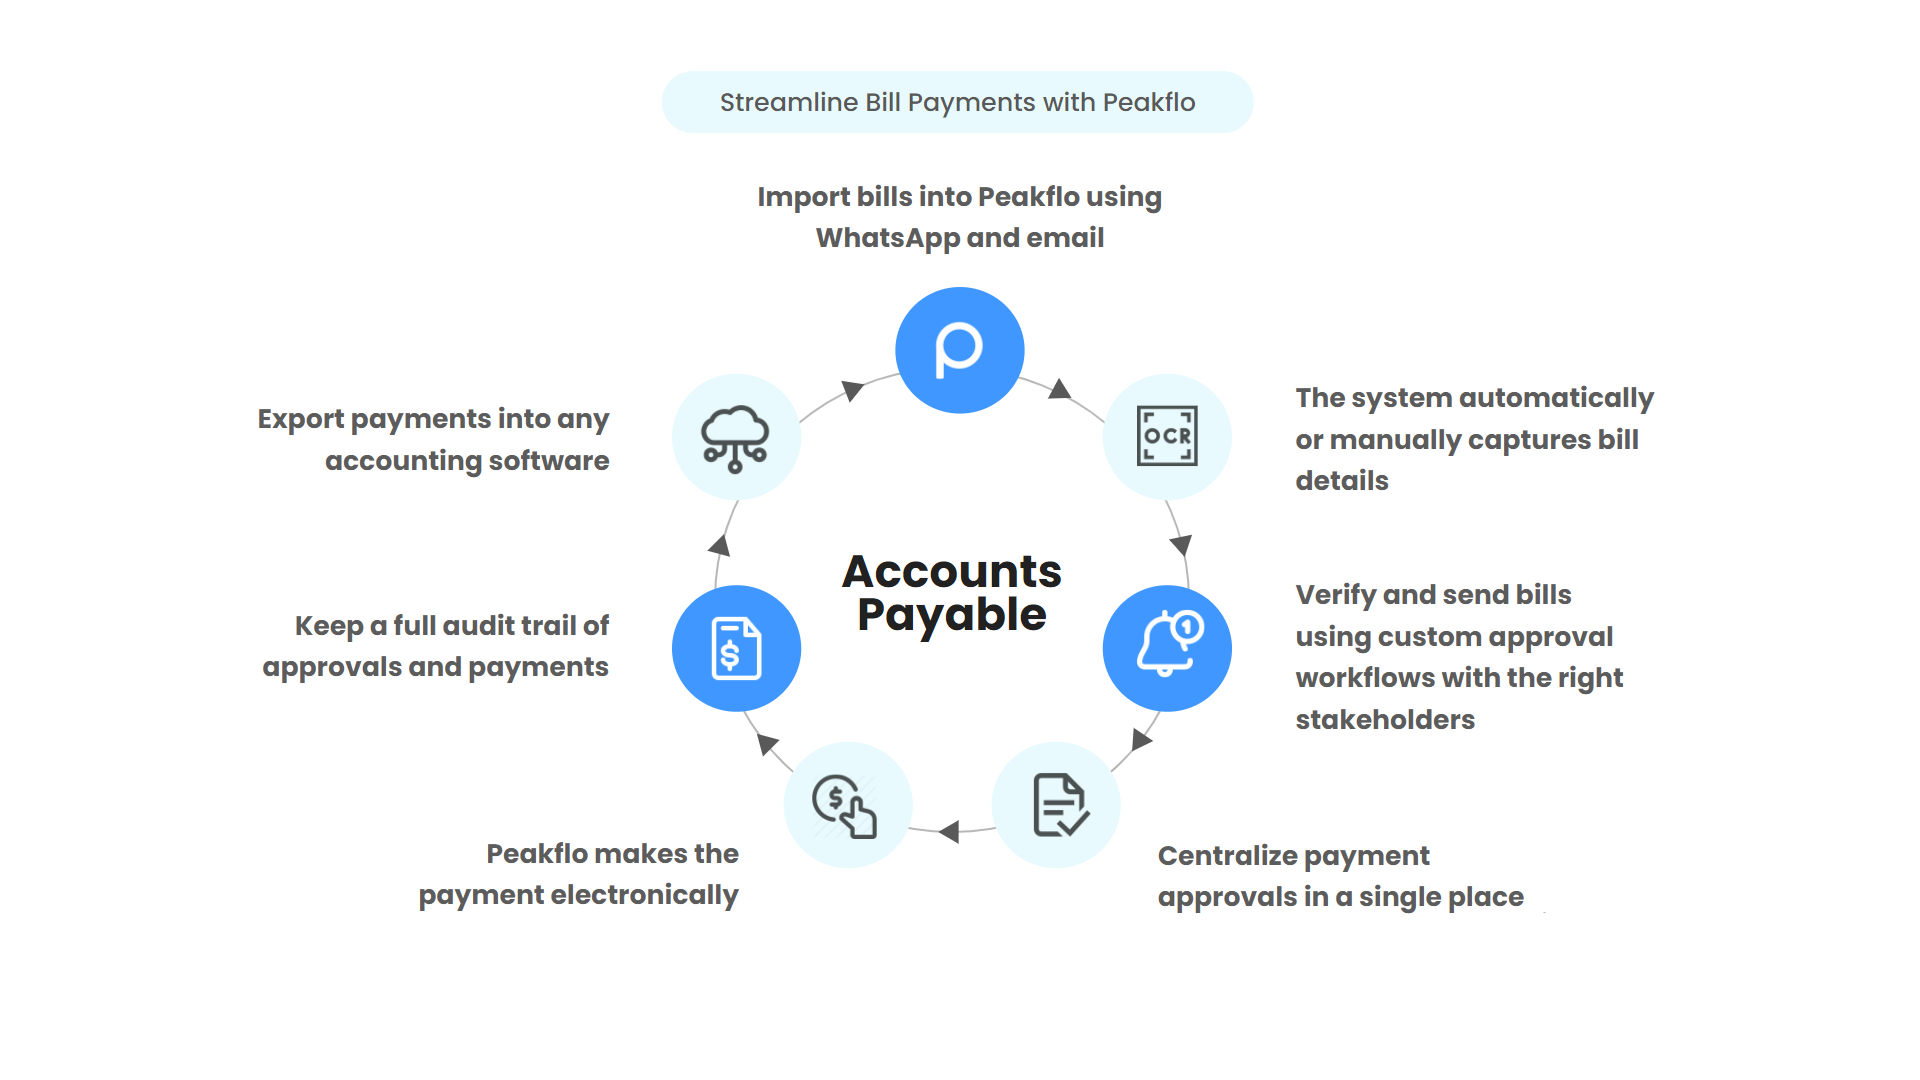 Pay bills effortlessly -Capture bill details automatically or manually.  -Streamline approval process.  -Make payments confidently at 0% FX markup.